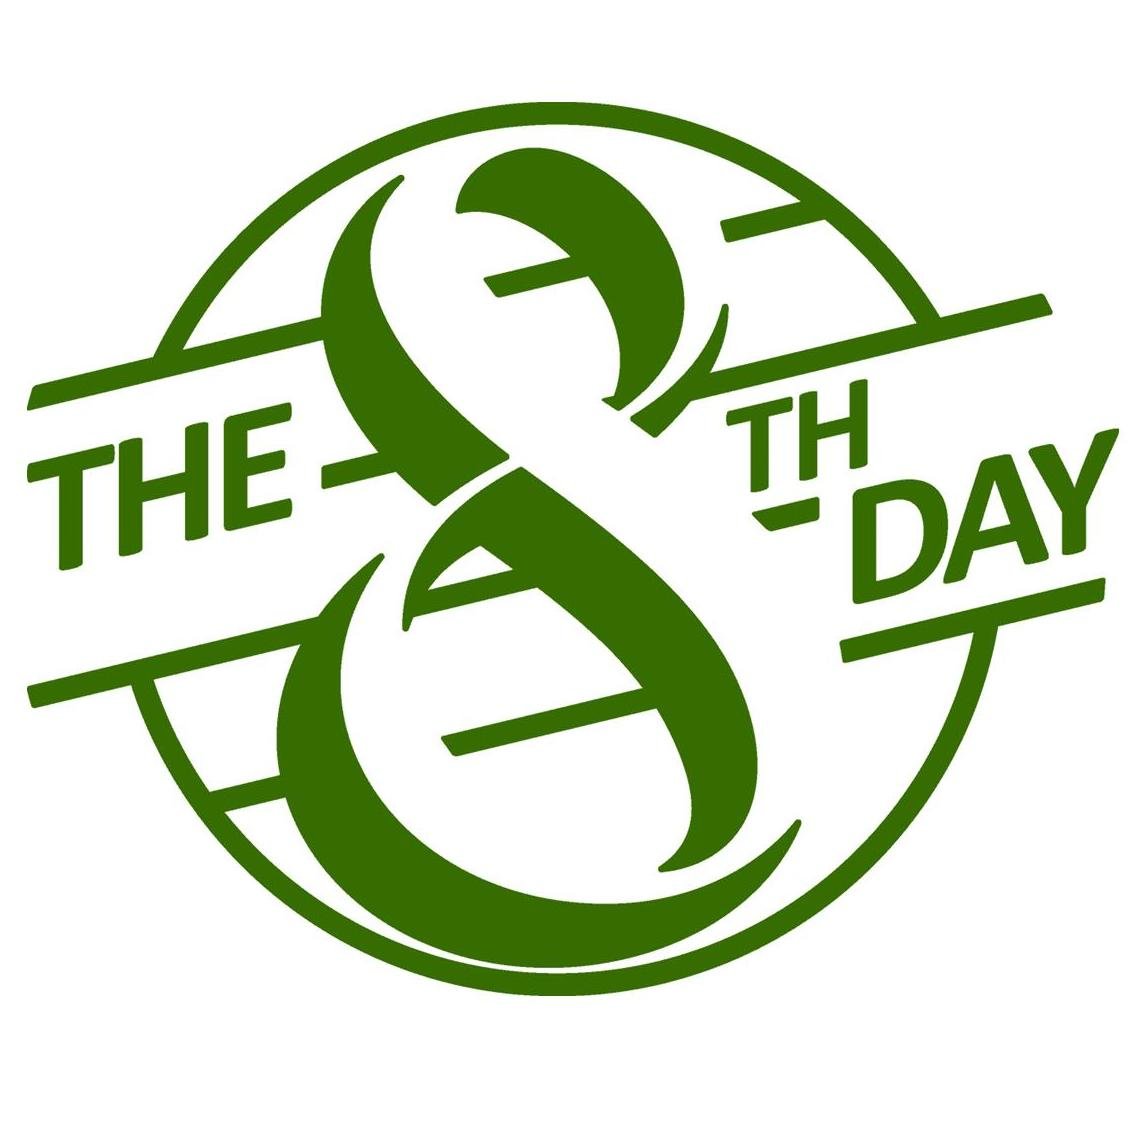 On The Eighth Day Co-operative Ltd logo